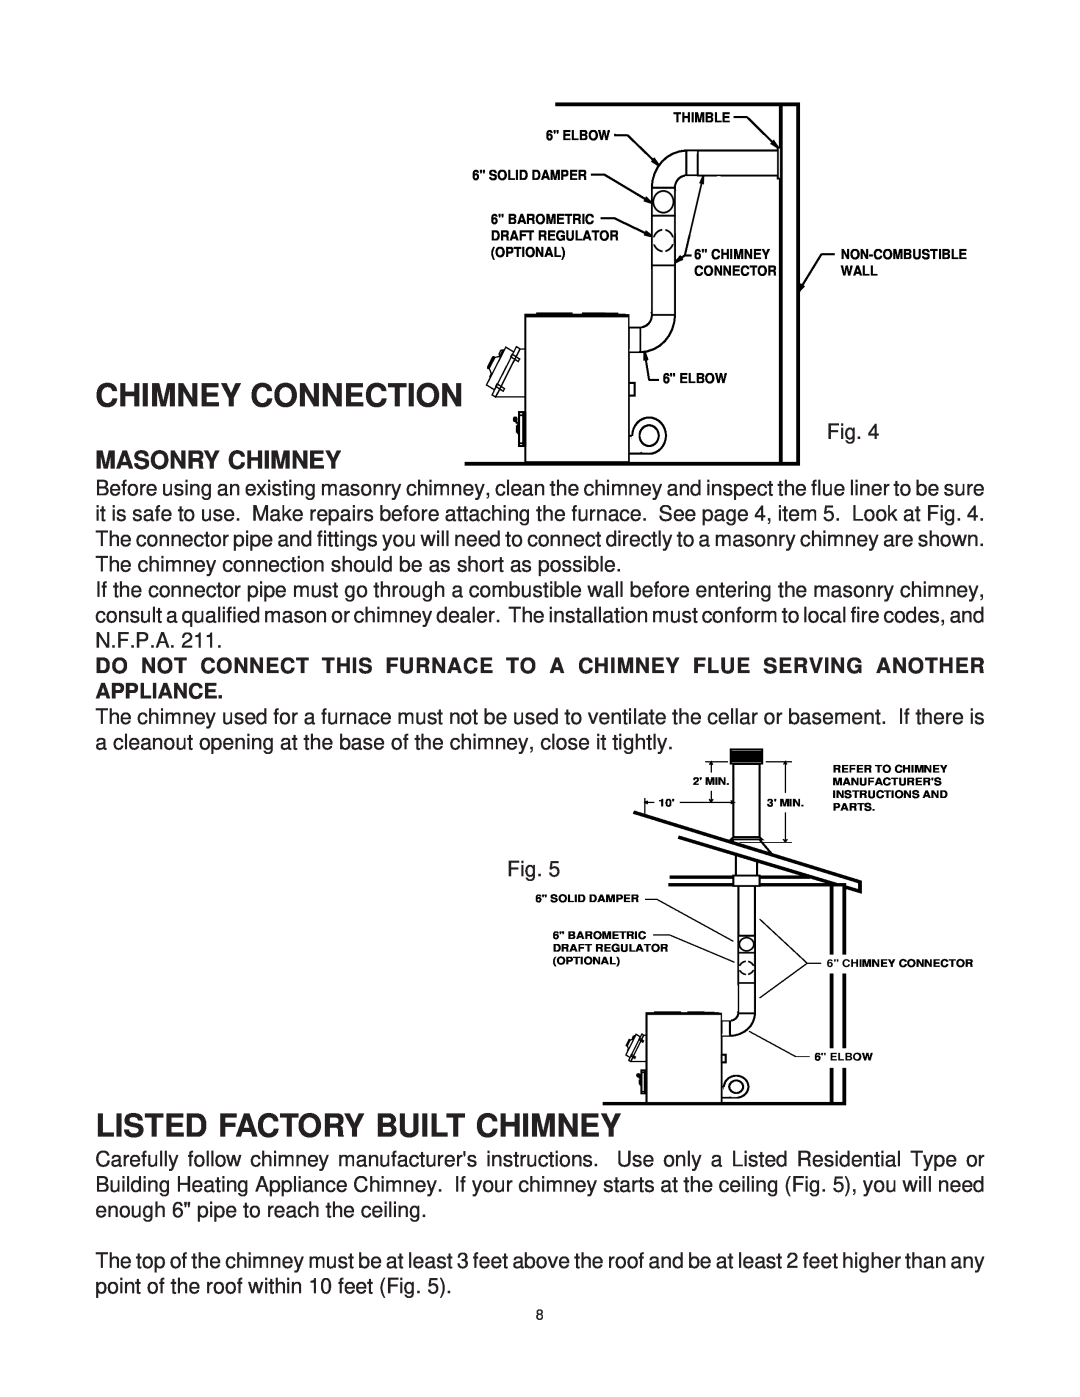 United States Stove 1537G owner manual Chimney Connection, Listed Factory Built Chimney, Masonry Chimney 